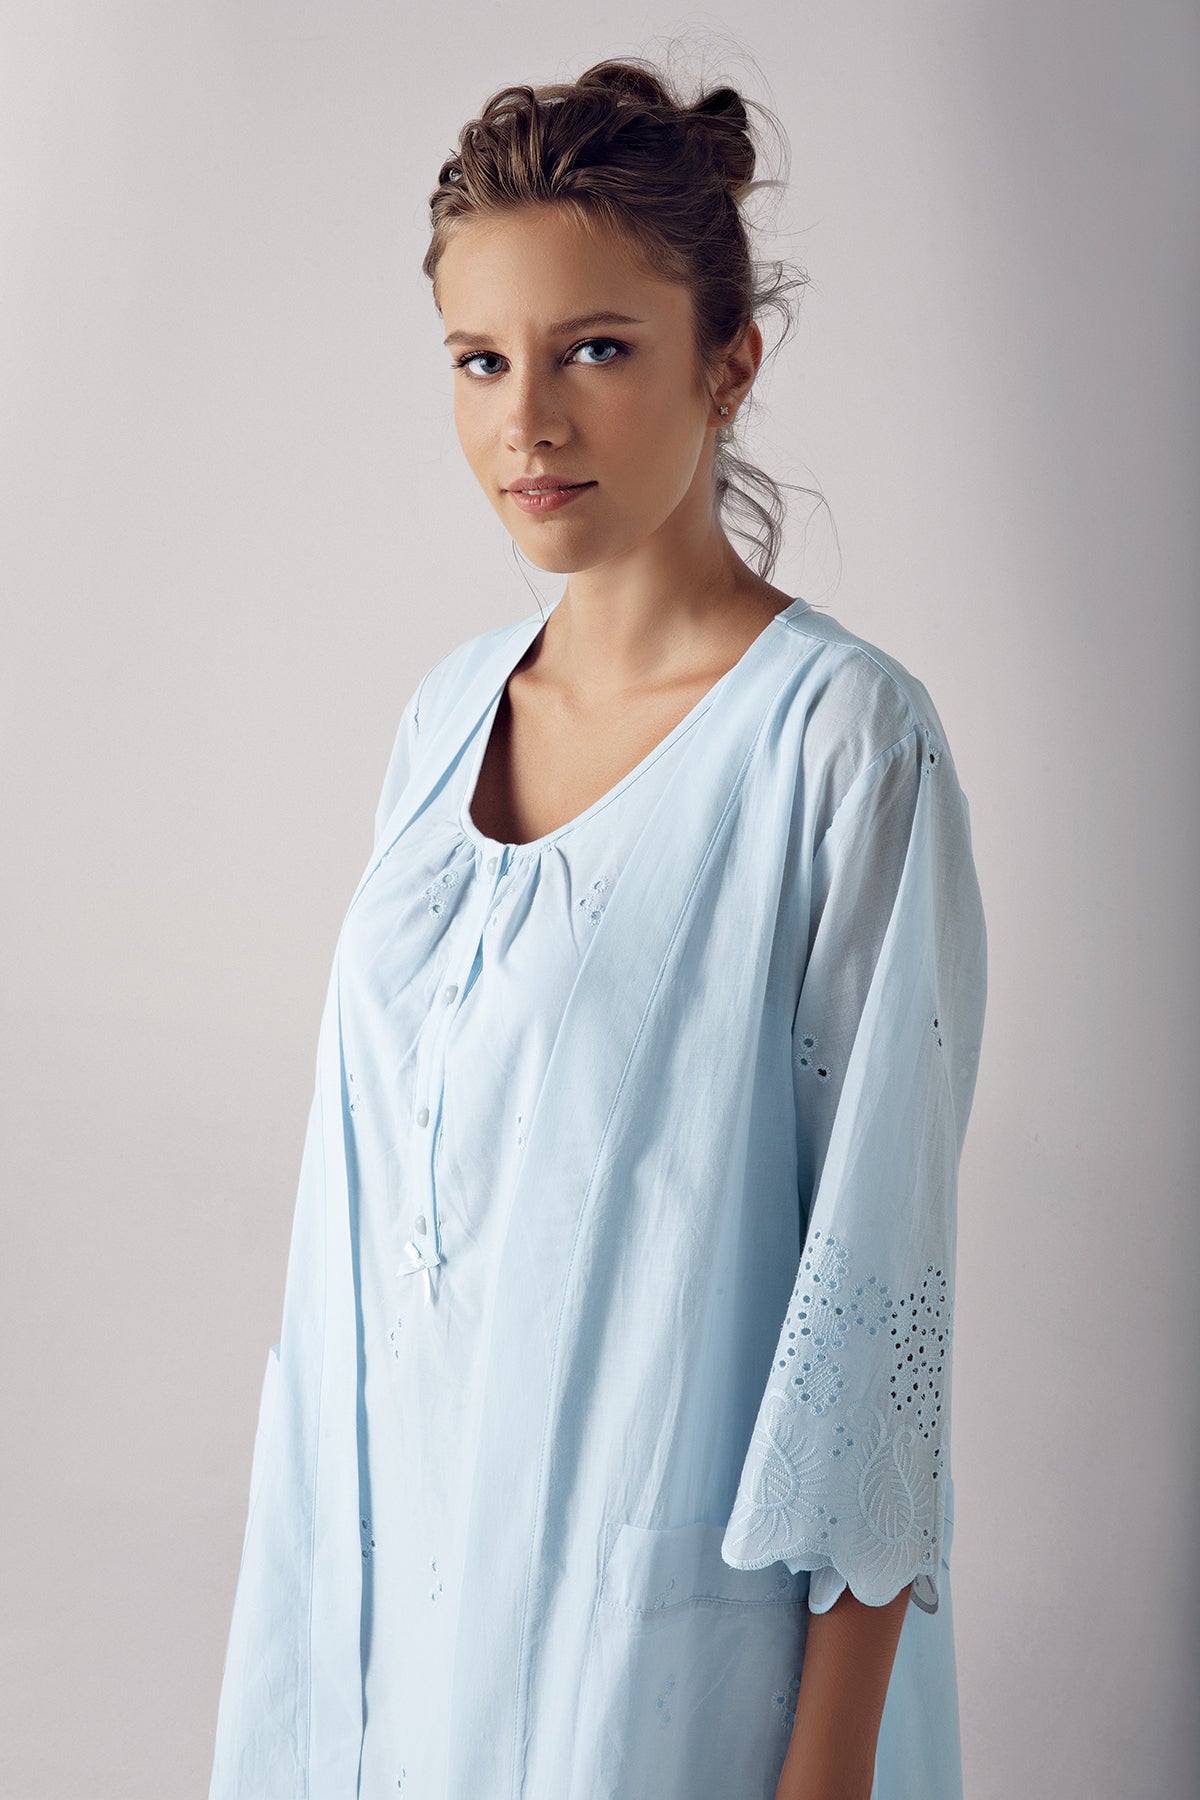 Shopymommy 10402 Cotton Weaving Maternity & Nursing Nightgown With Robe Blue